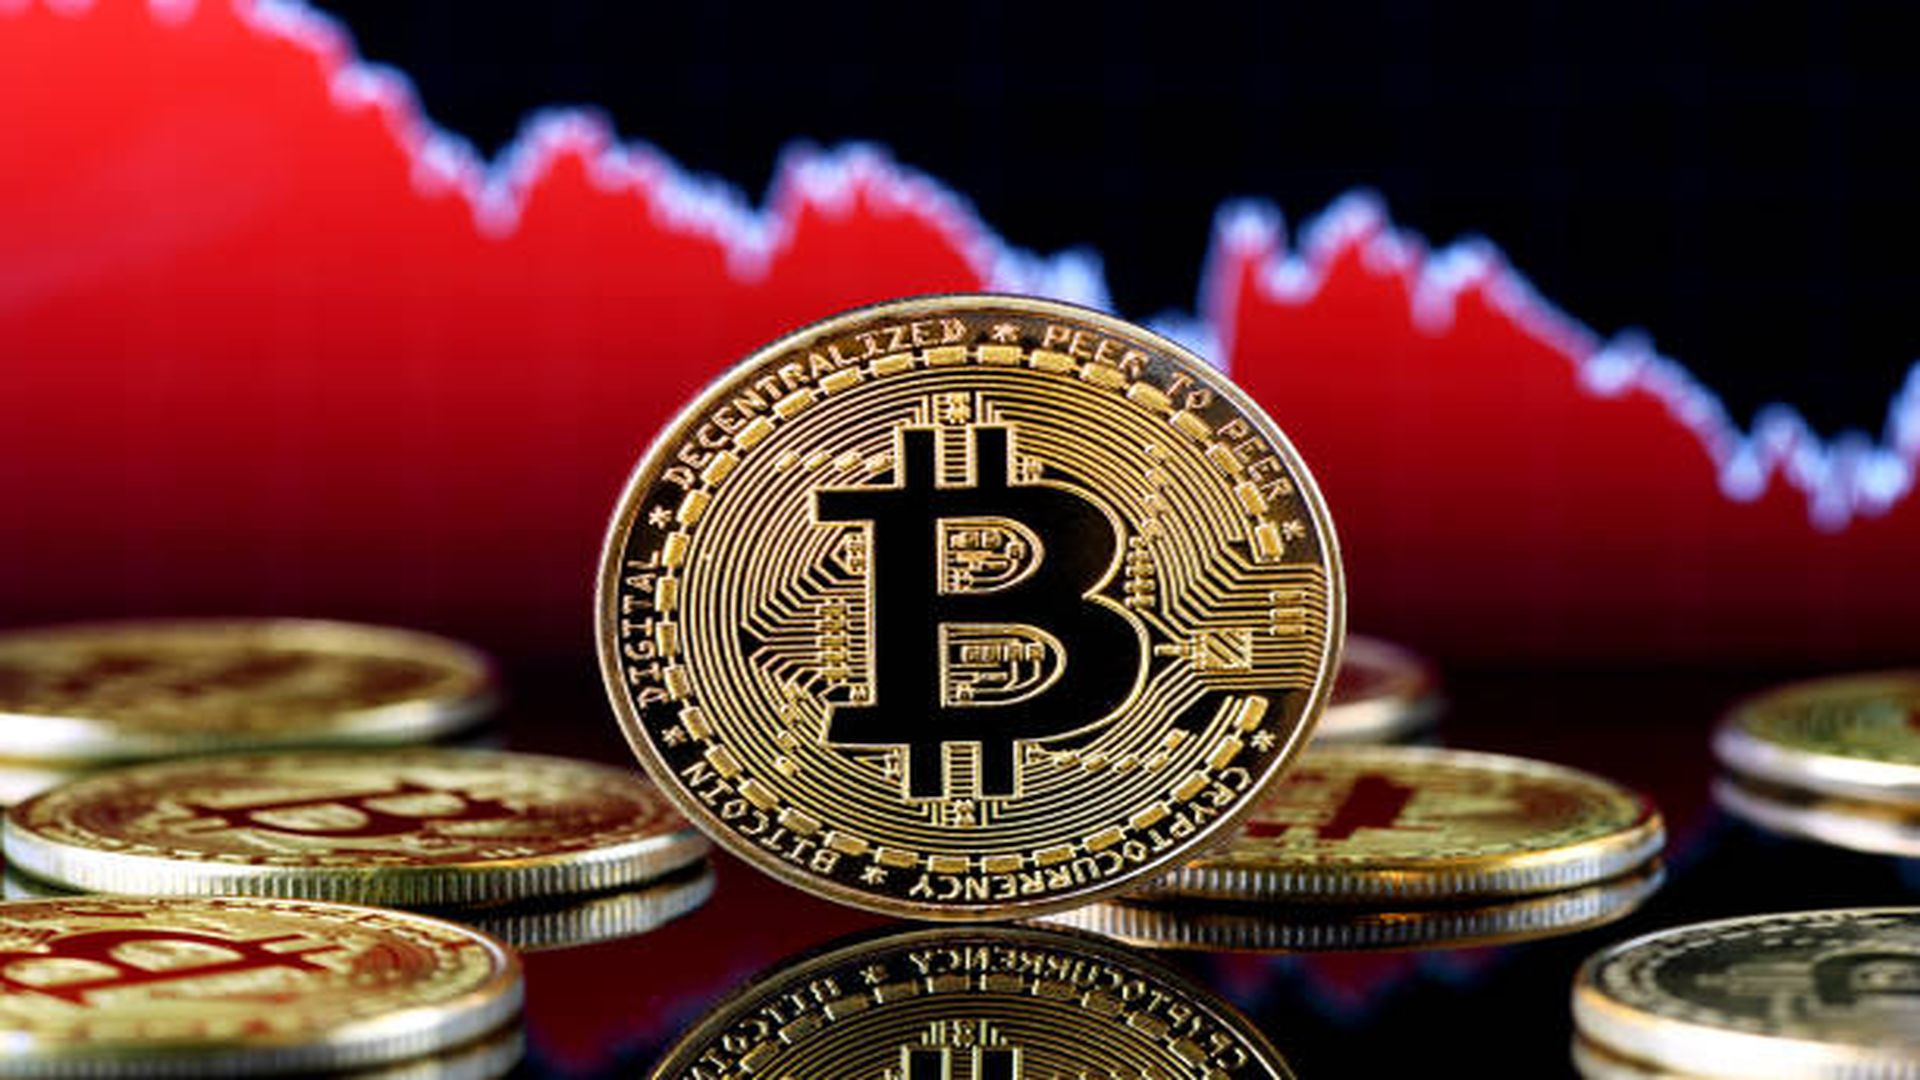 Bitcoin Price Drop And Crypto Market Chaos Increase – Is Germany To Blame?